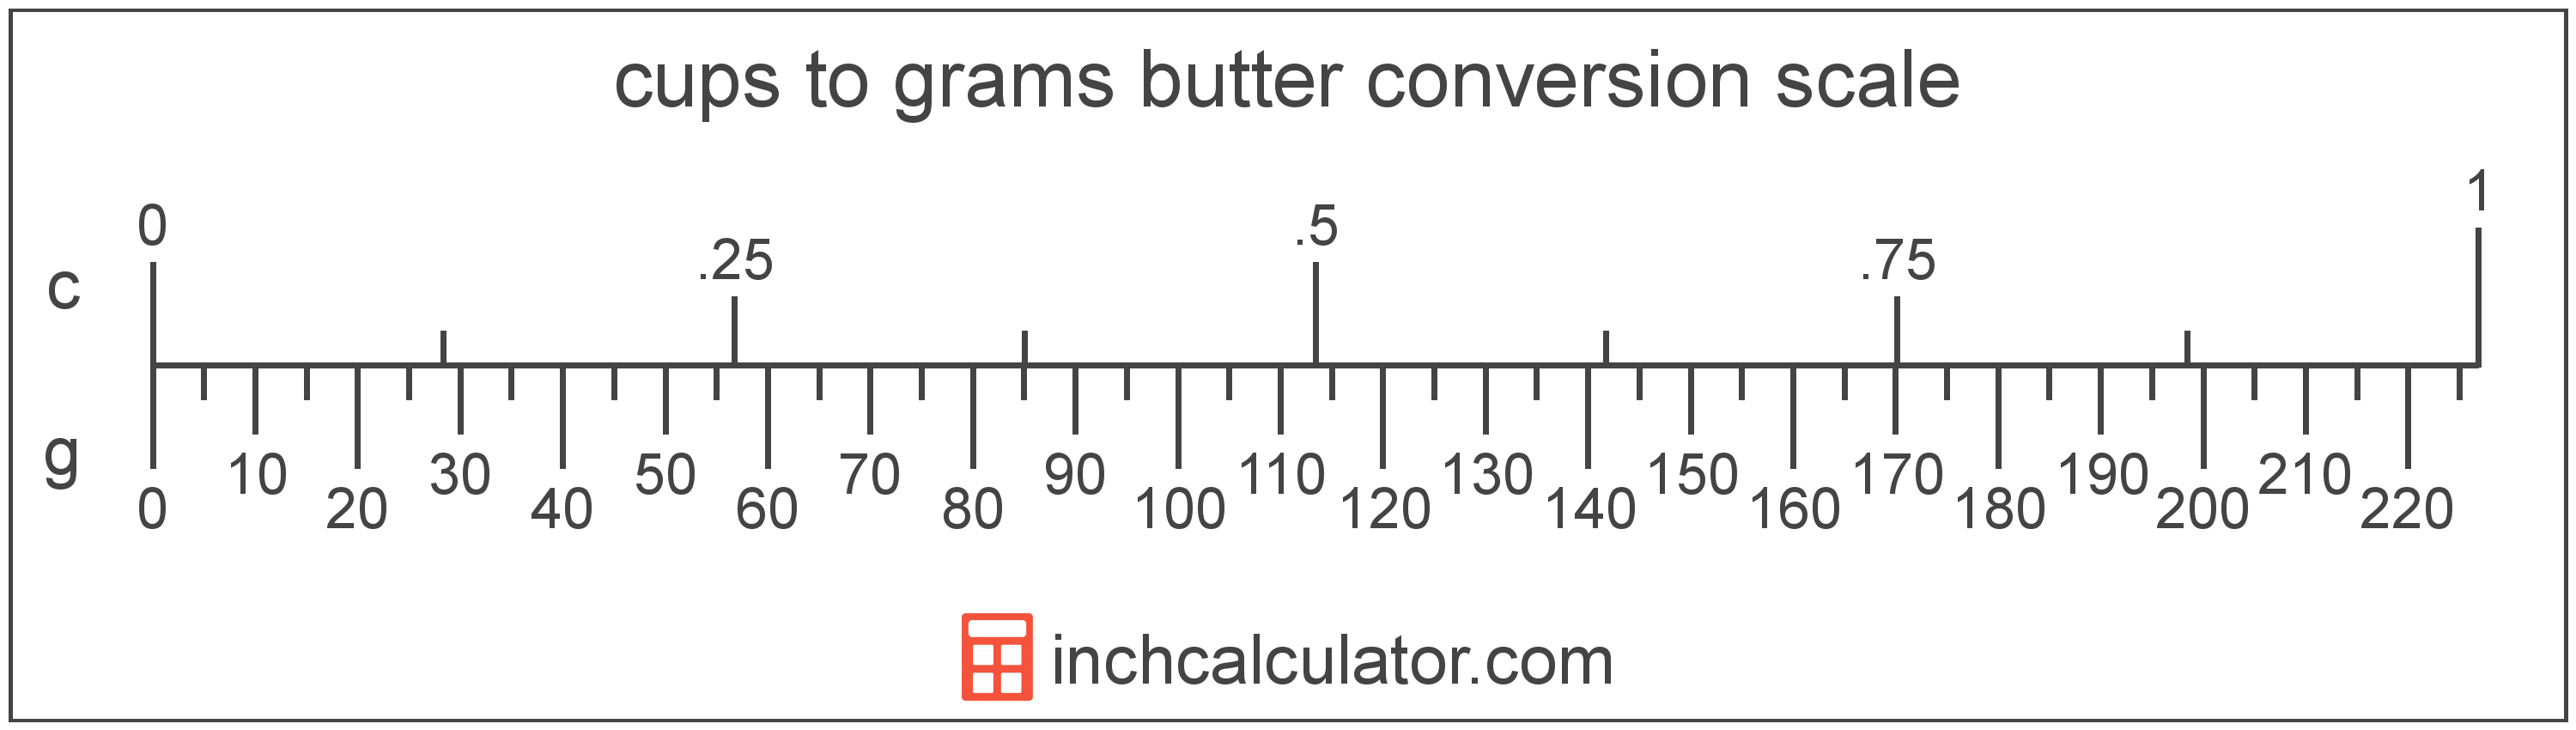 1/3 cup butter in grams